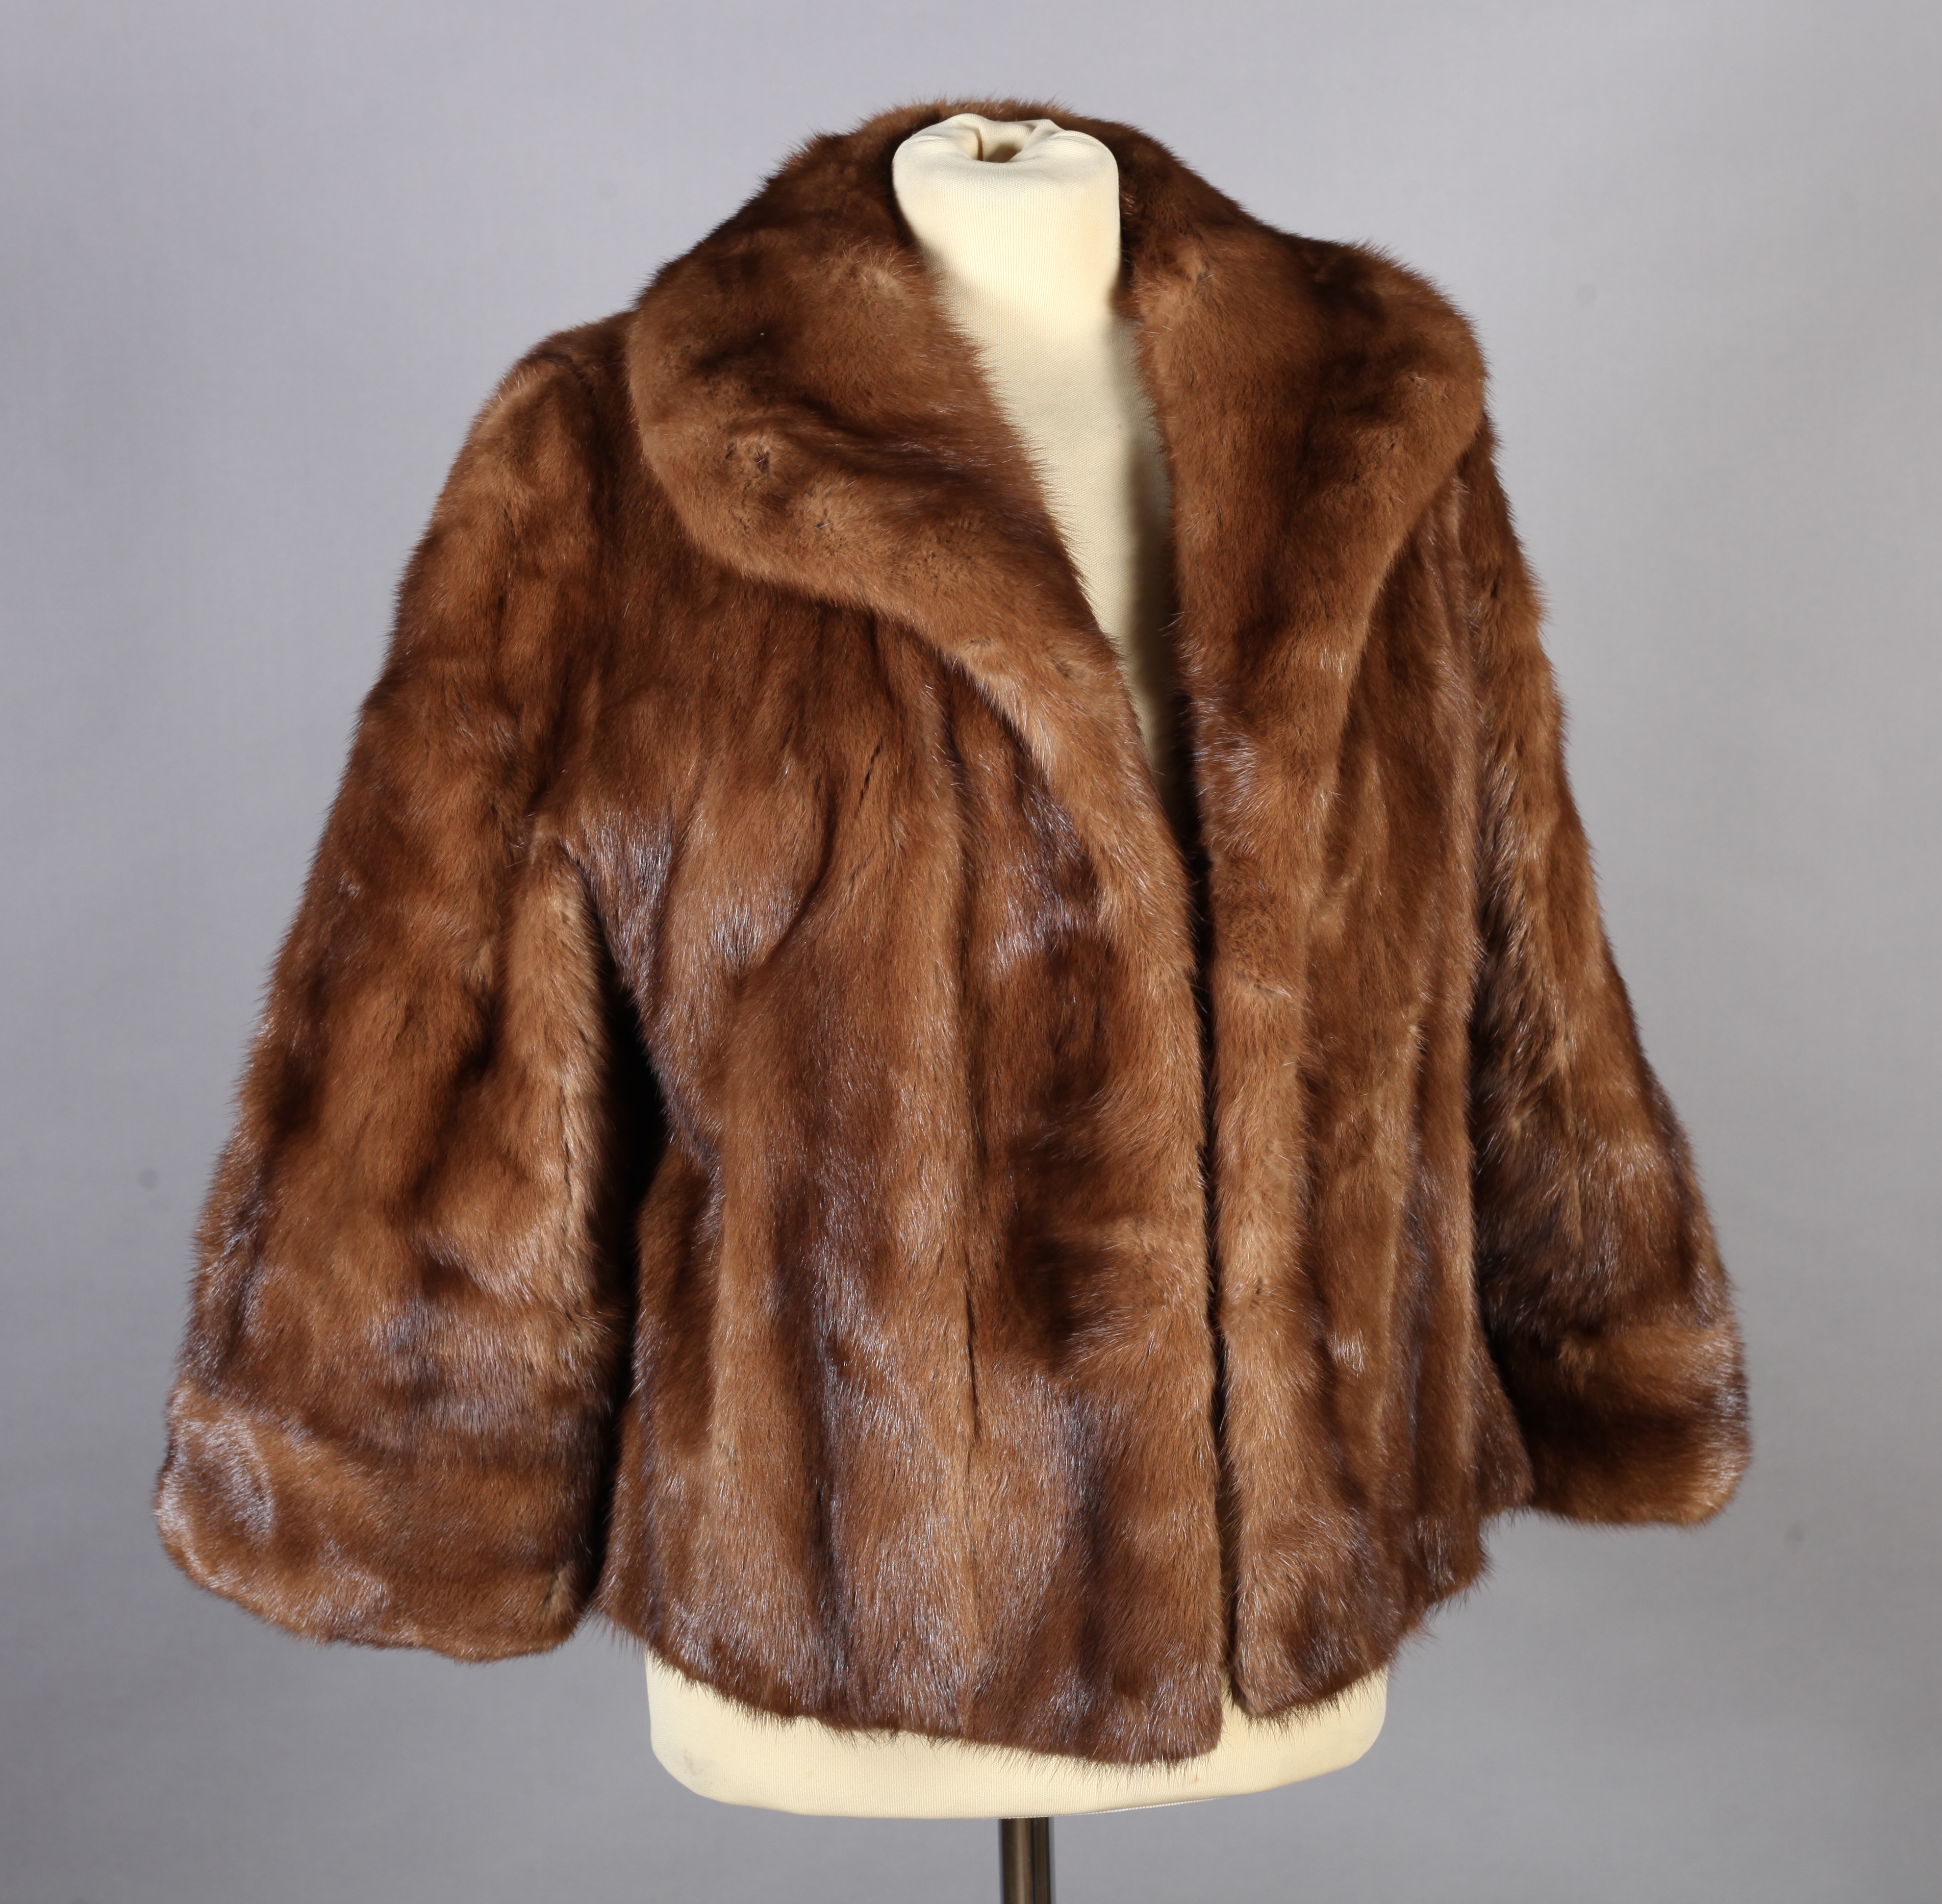 A mink jacket with three quarter length sleeves